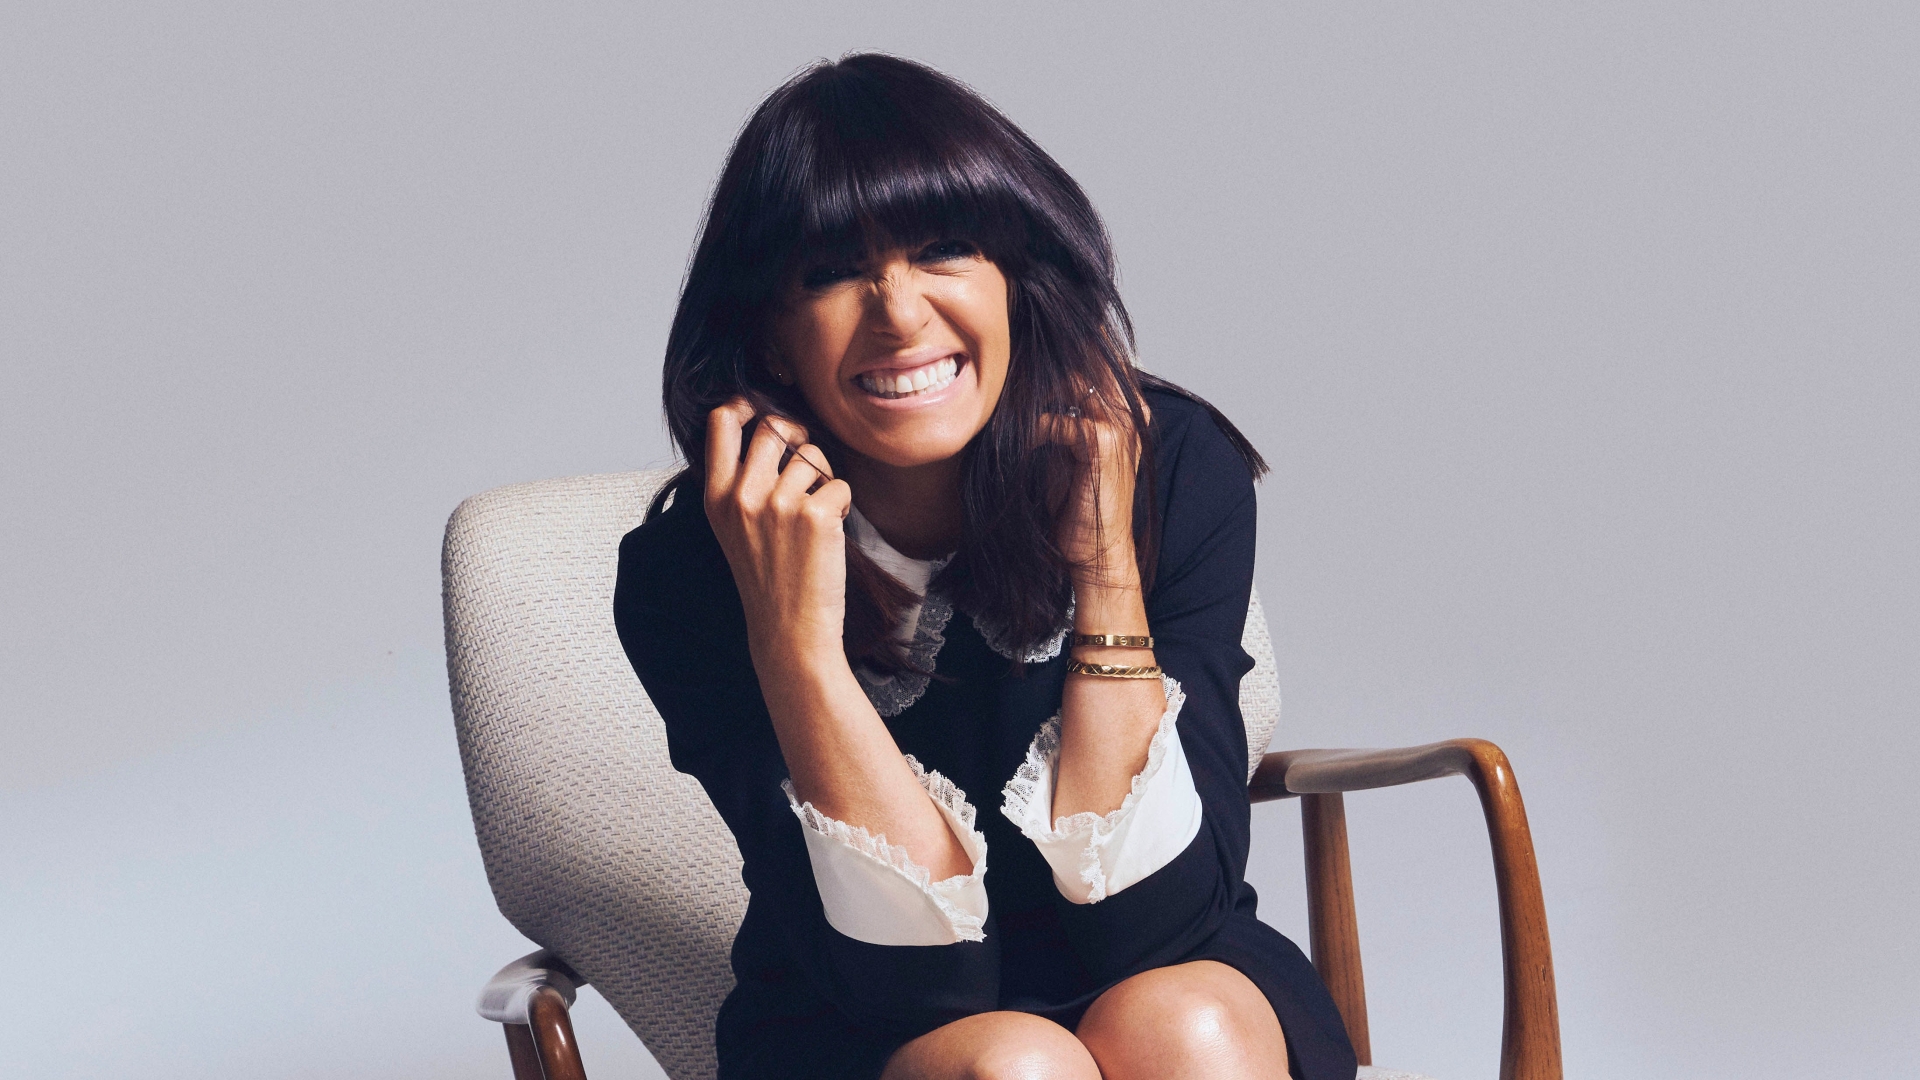 Claudia Winkleman reveals the secret to her TV success - and her sex life